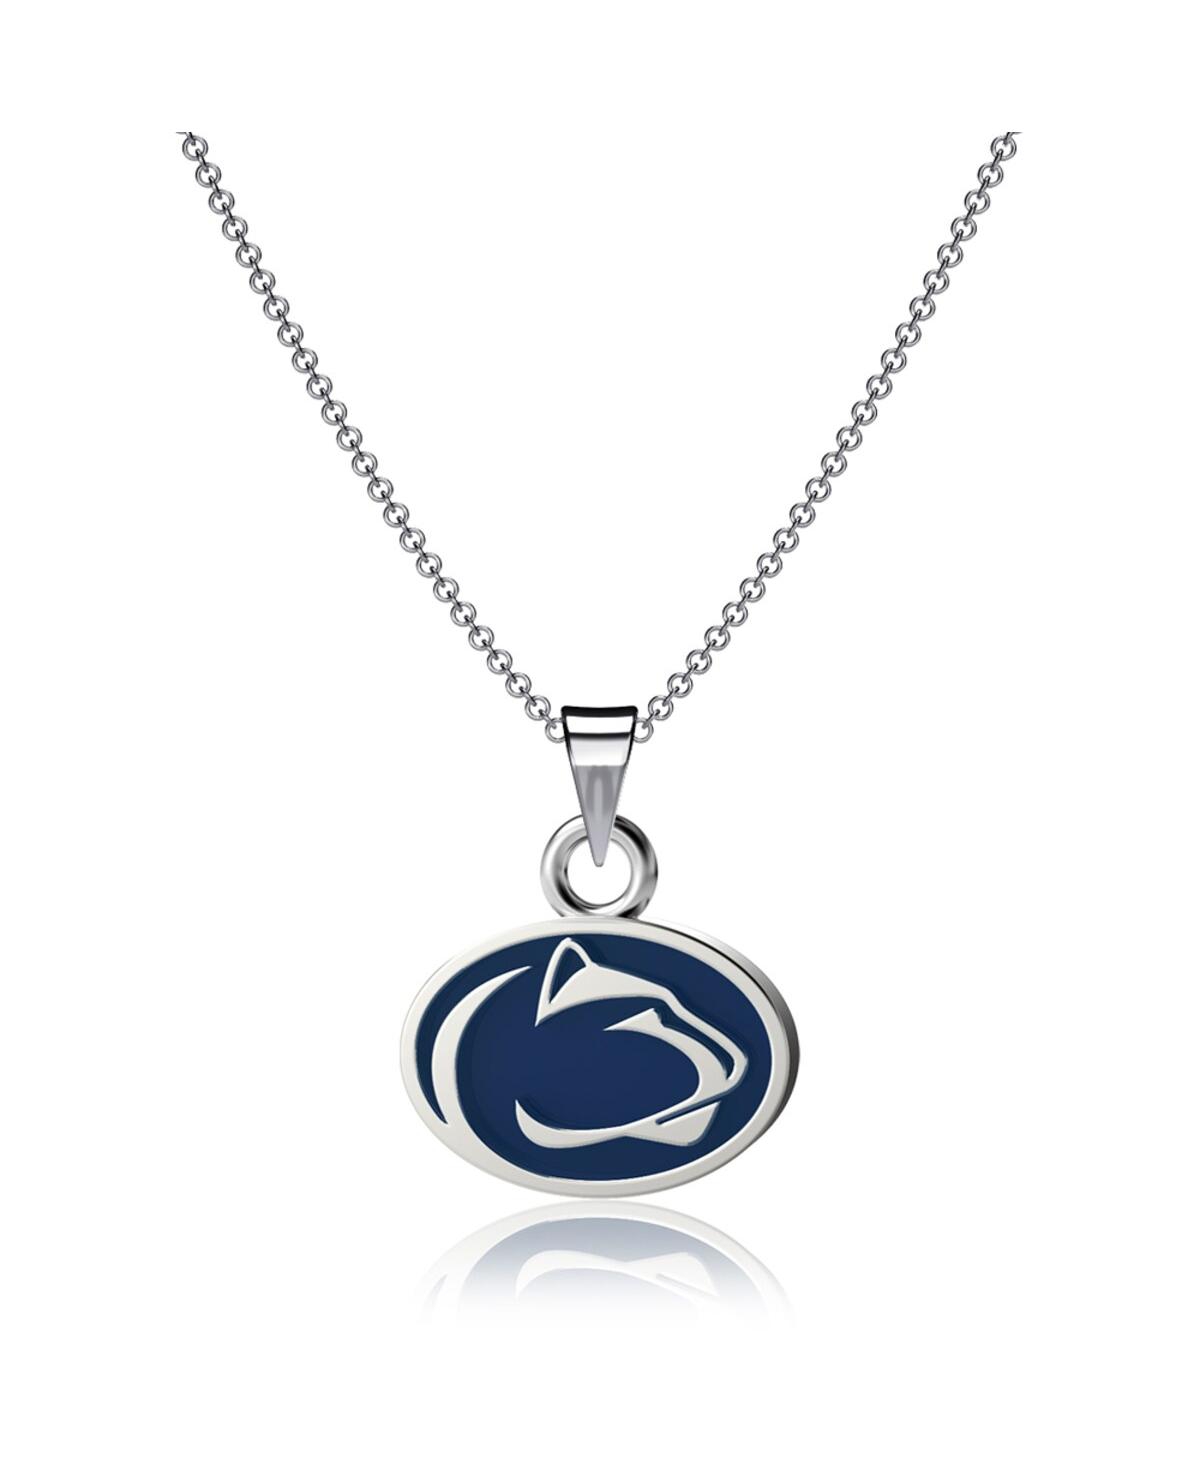 Dayna Designs Women's  Penn State Nittany Lions Enamel Pendant Necklace In Navy,silver